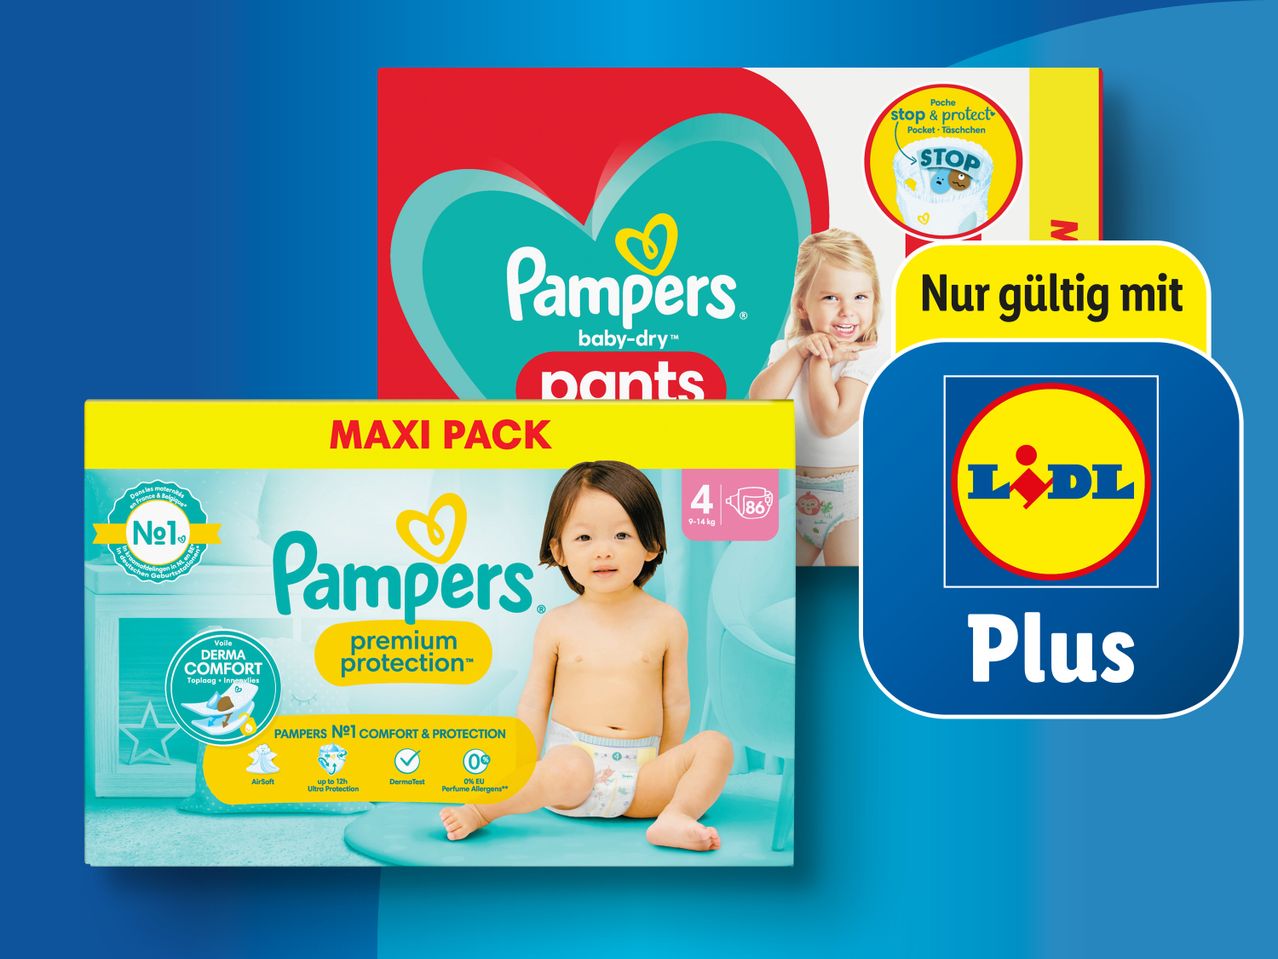 Dry/Pants Pampers Premium Protection/Baby